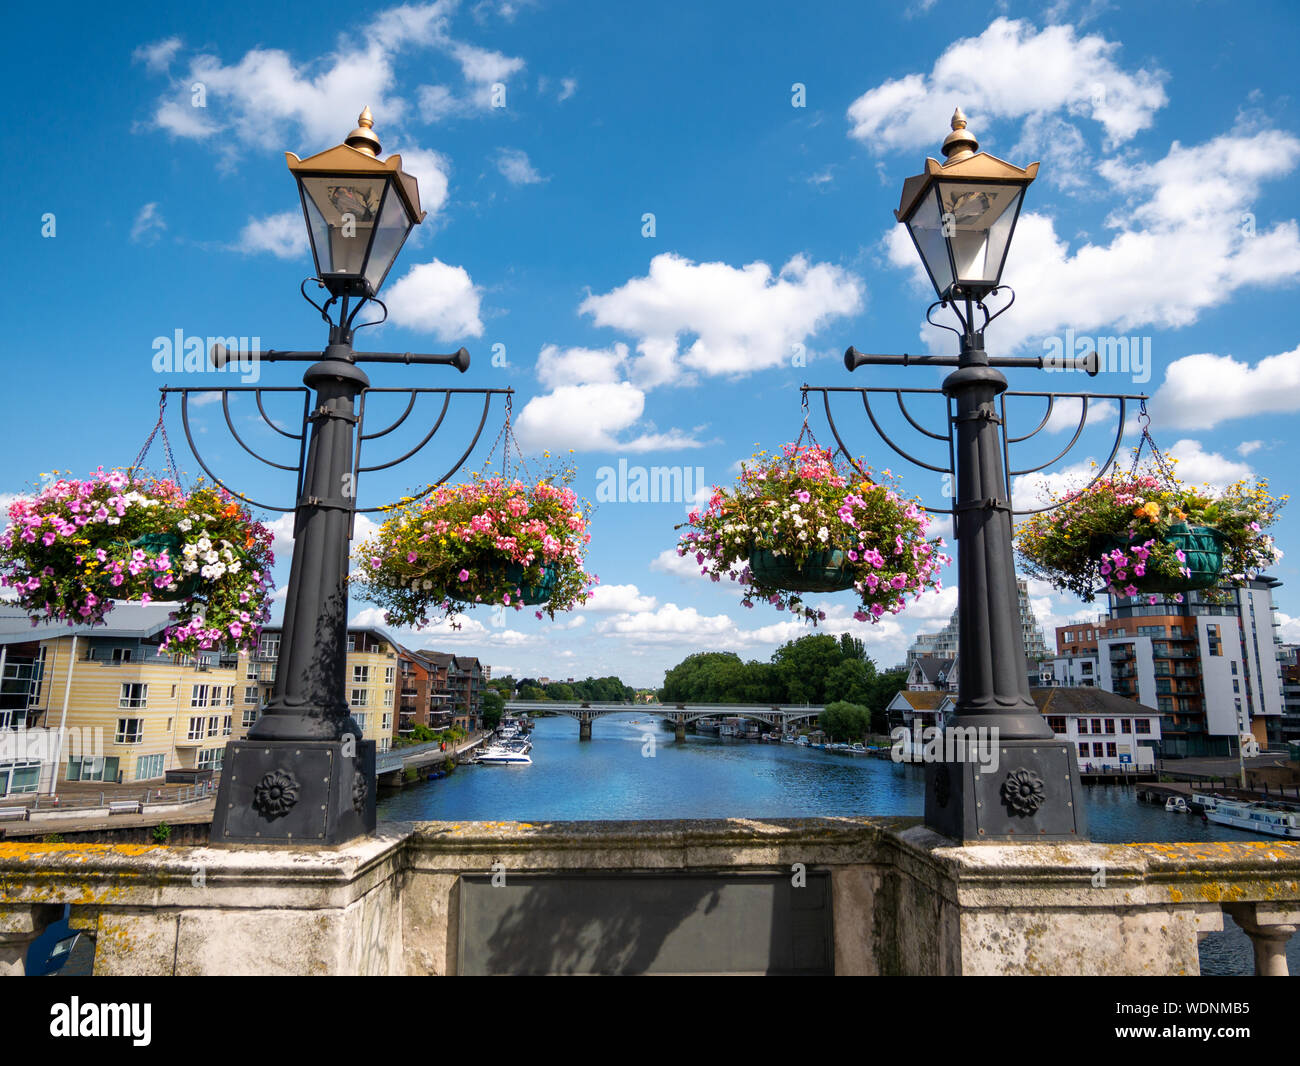 Ornamental flowers and medieval lamps on the wall of Kingston bridge in a sunny day Stock Photo